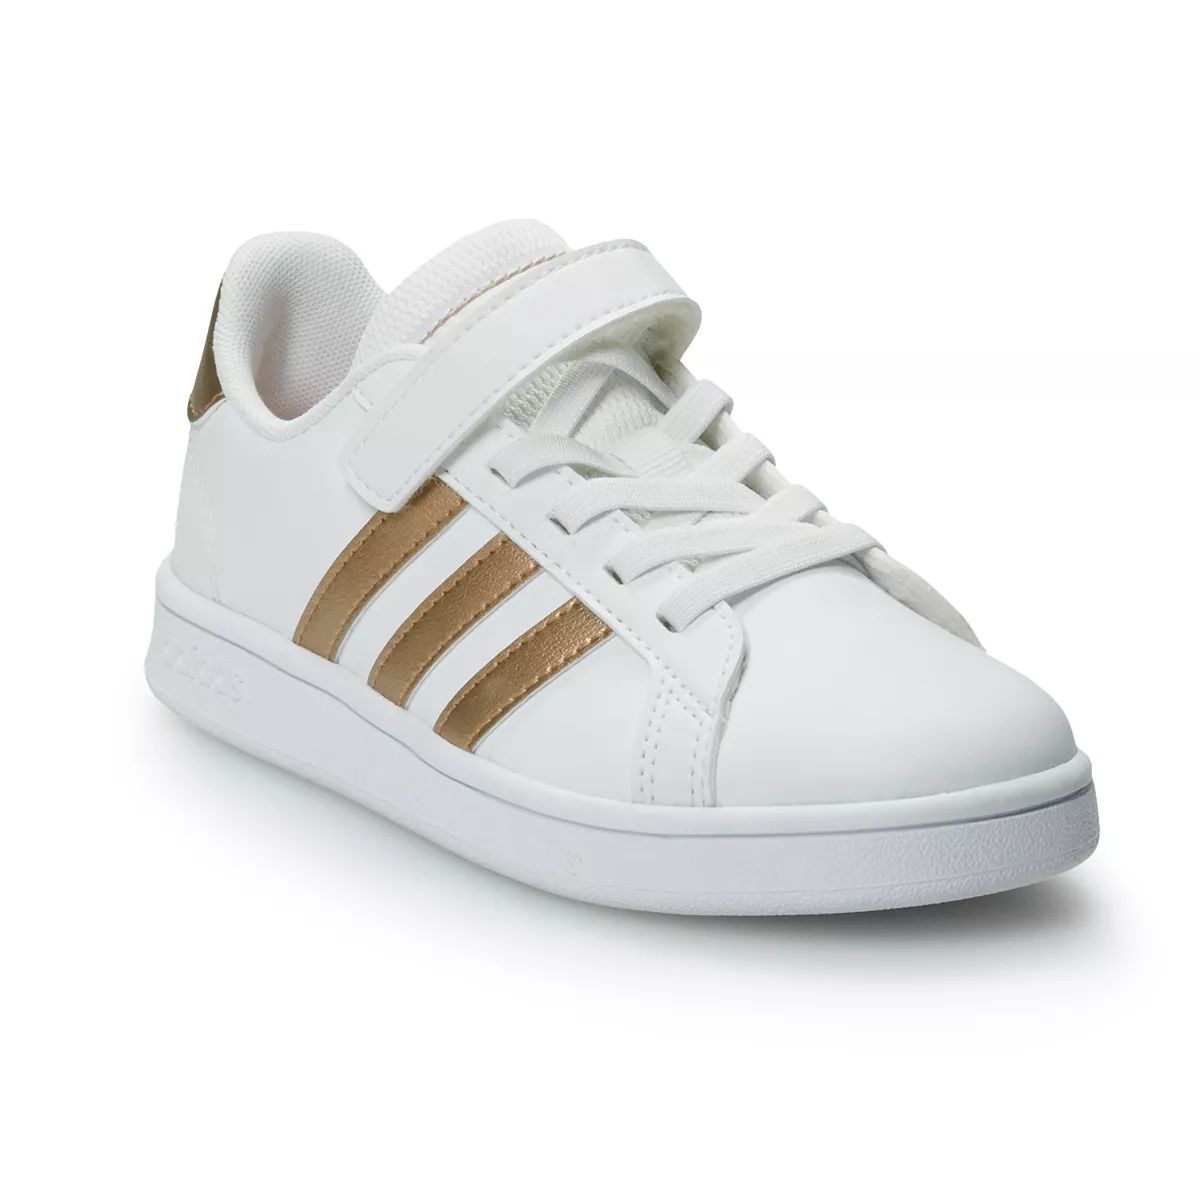 adidas Grand Court Kids' Sneakers | Kohl's